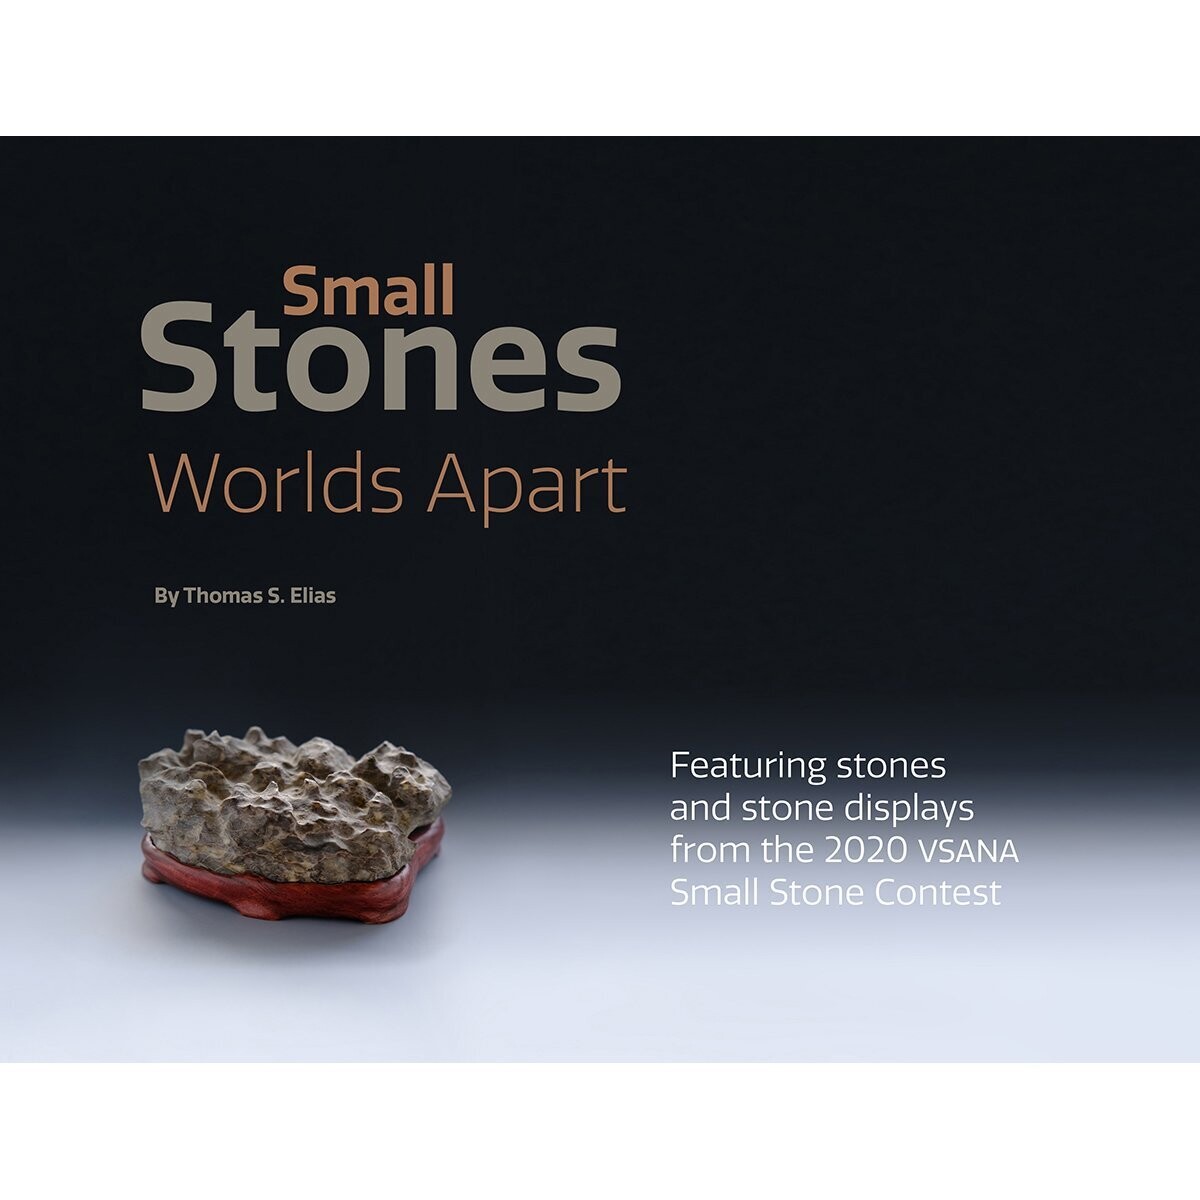 Small Stones Worlds Apart (Ebook for large screens)